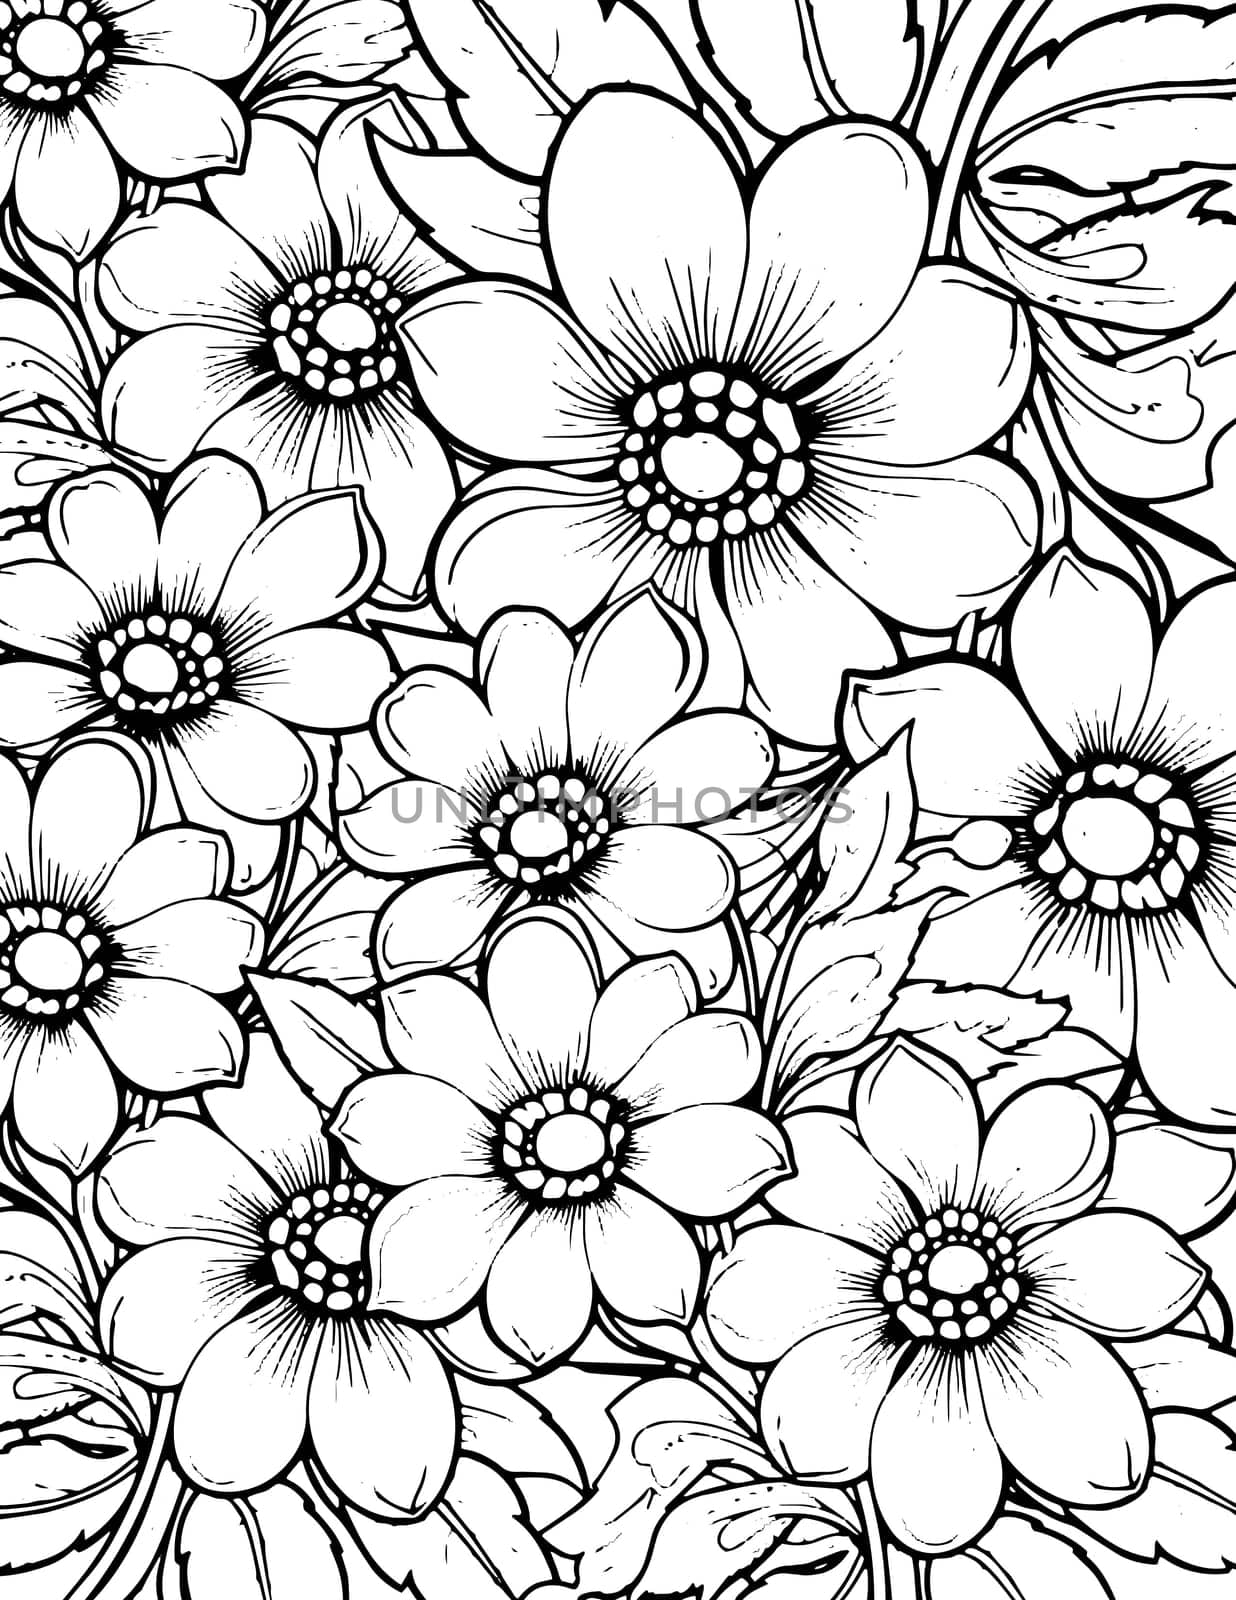 Flowers coloring spring and summer doodle ornament. Doodle coloring art with flowers and leaves black and white outline. Zentangle pattern for coloring book pages for adults and kids.